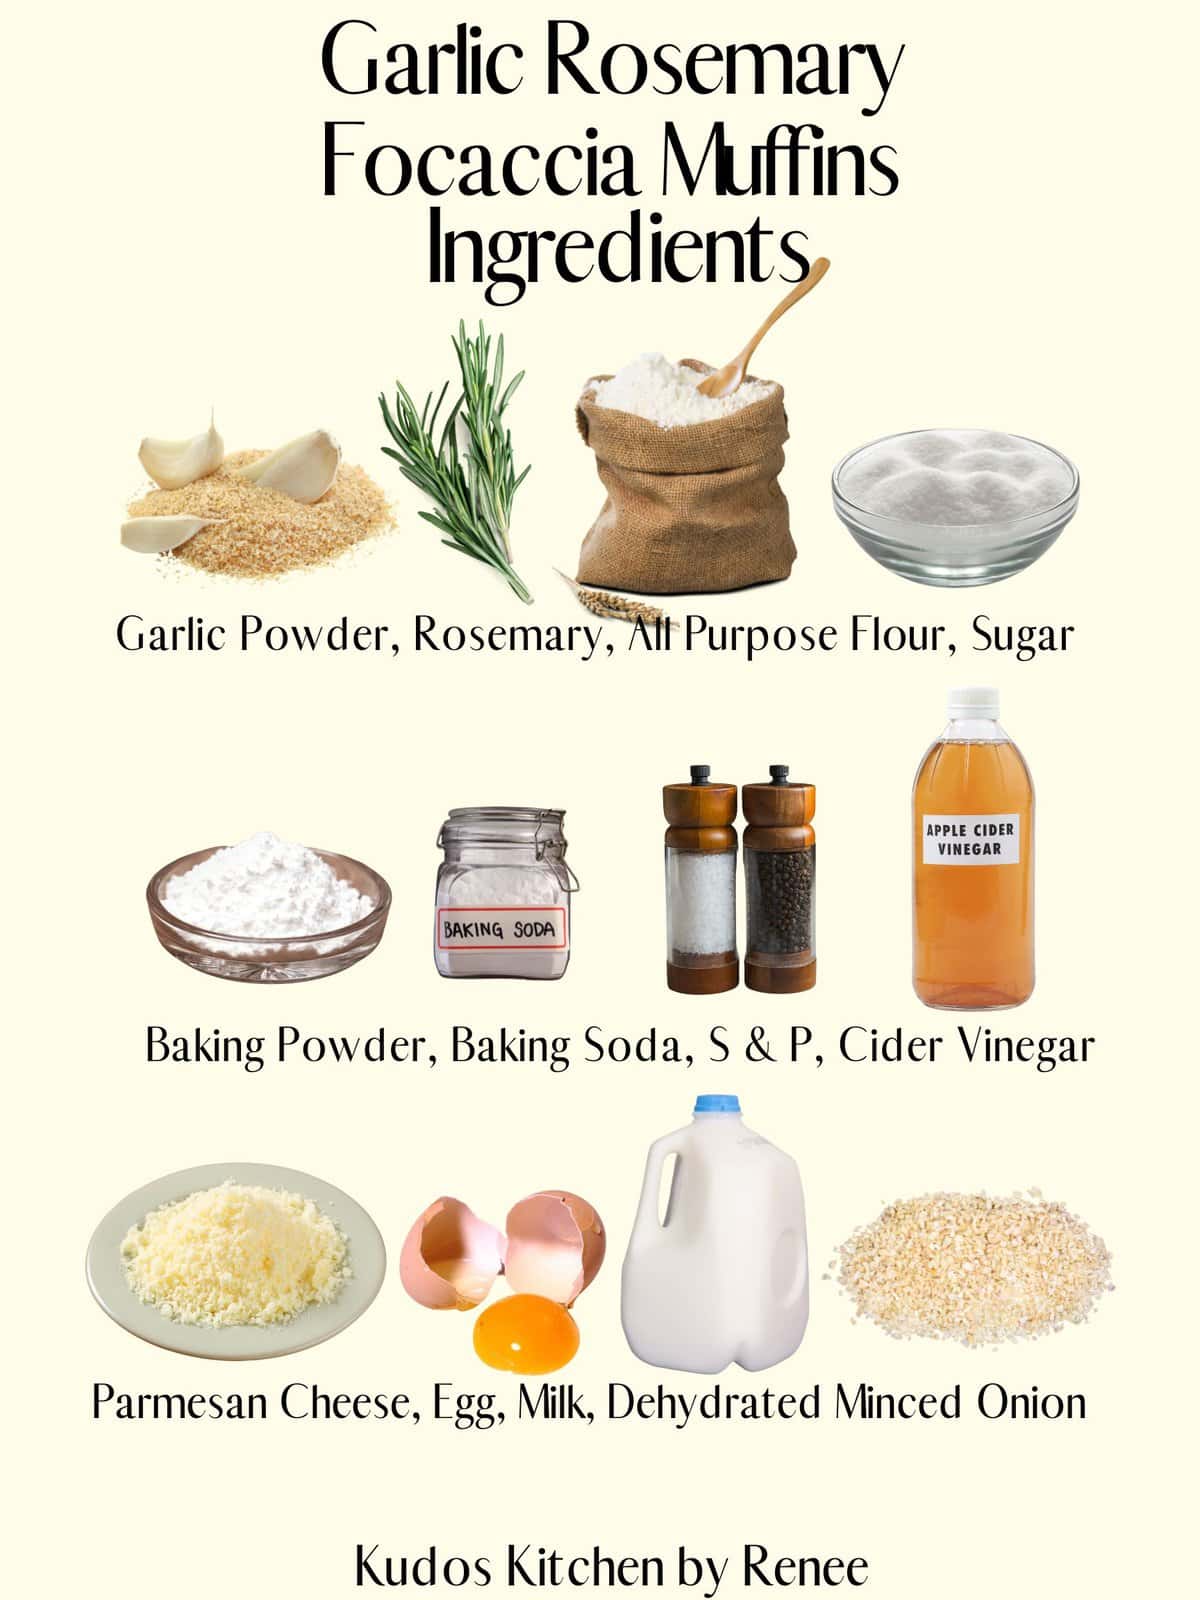 A visual ingredient list for making Garlic Rosemary Focaccia Muffins.